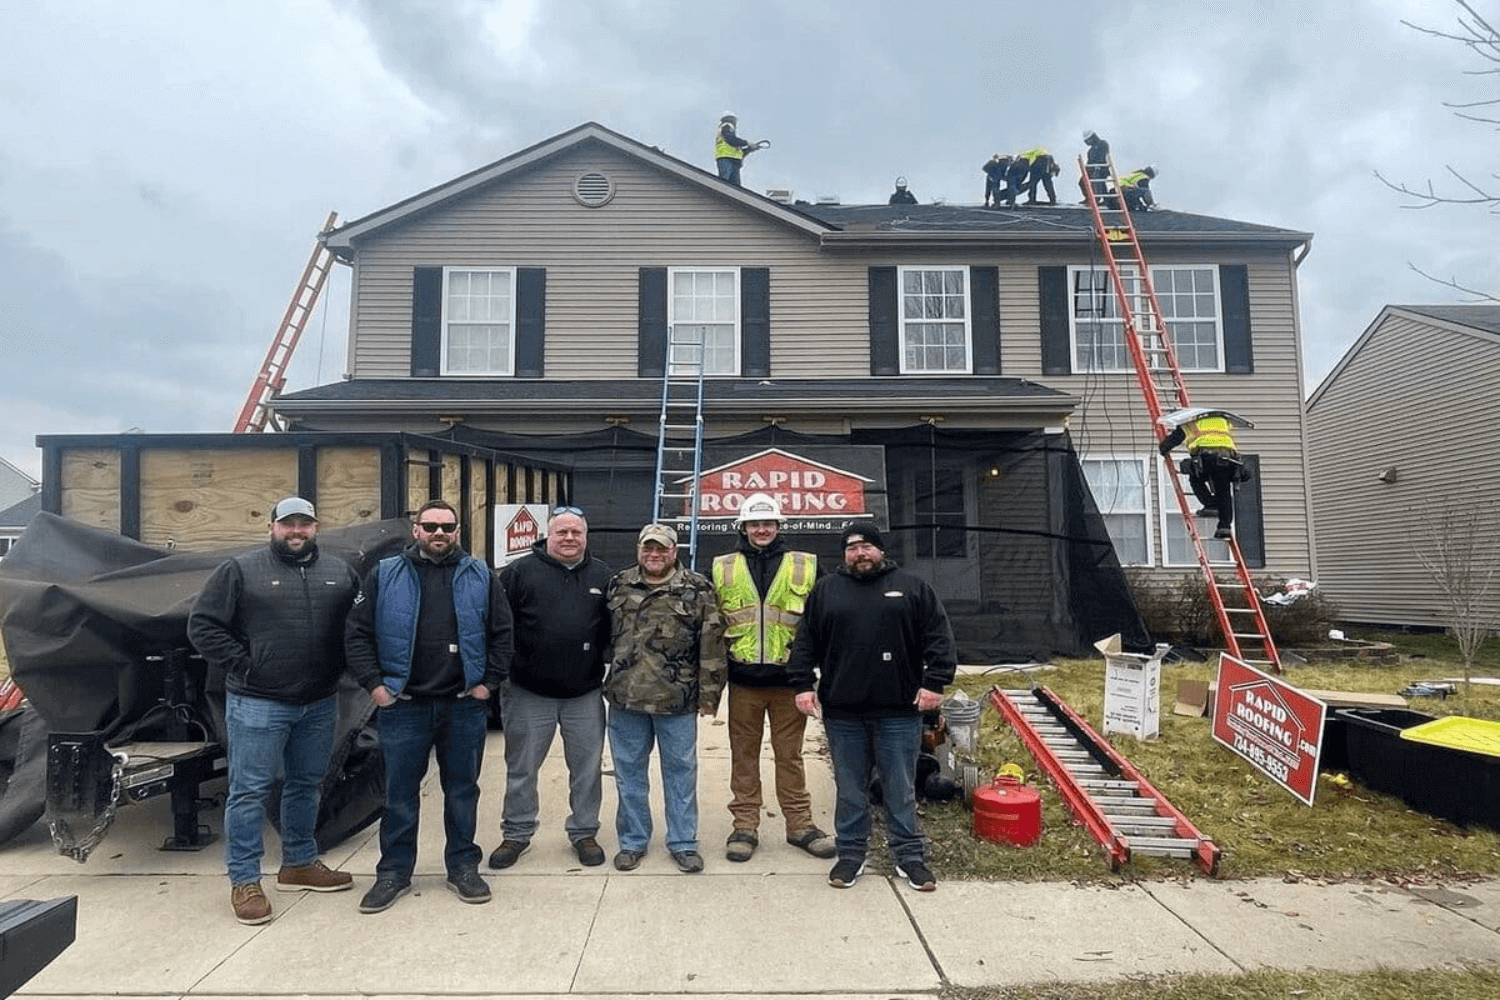 Our Professional Roofing Team Serving Ann Arbor Michigan and Surrounding Areas